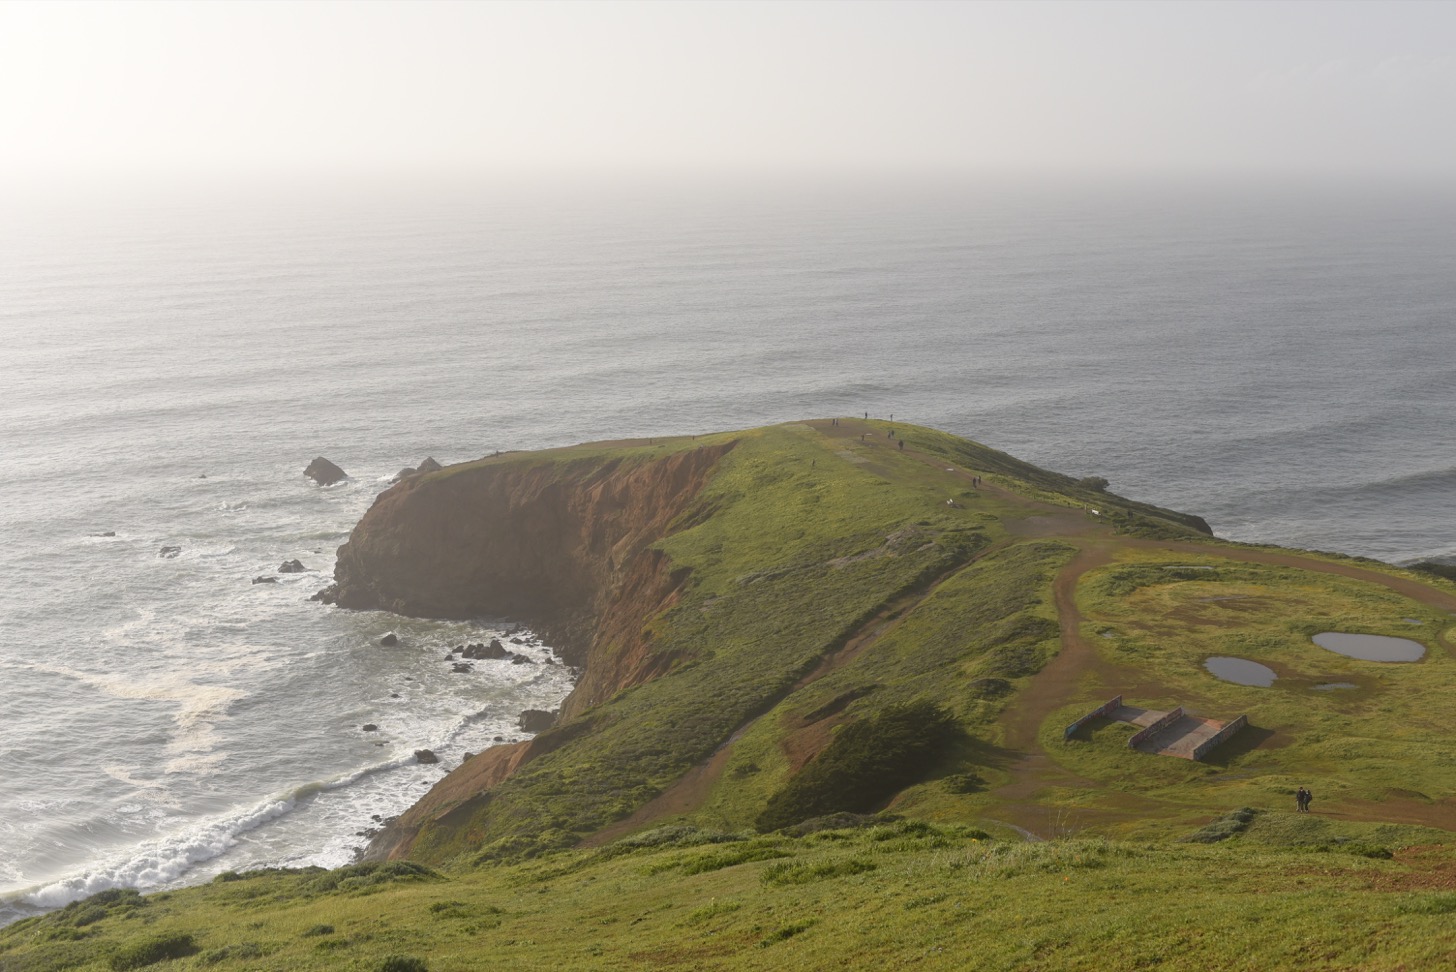 The bluffs at Mori Point.